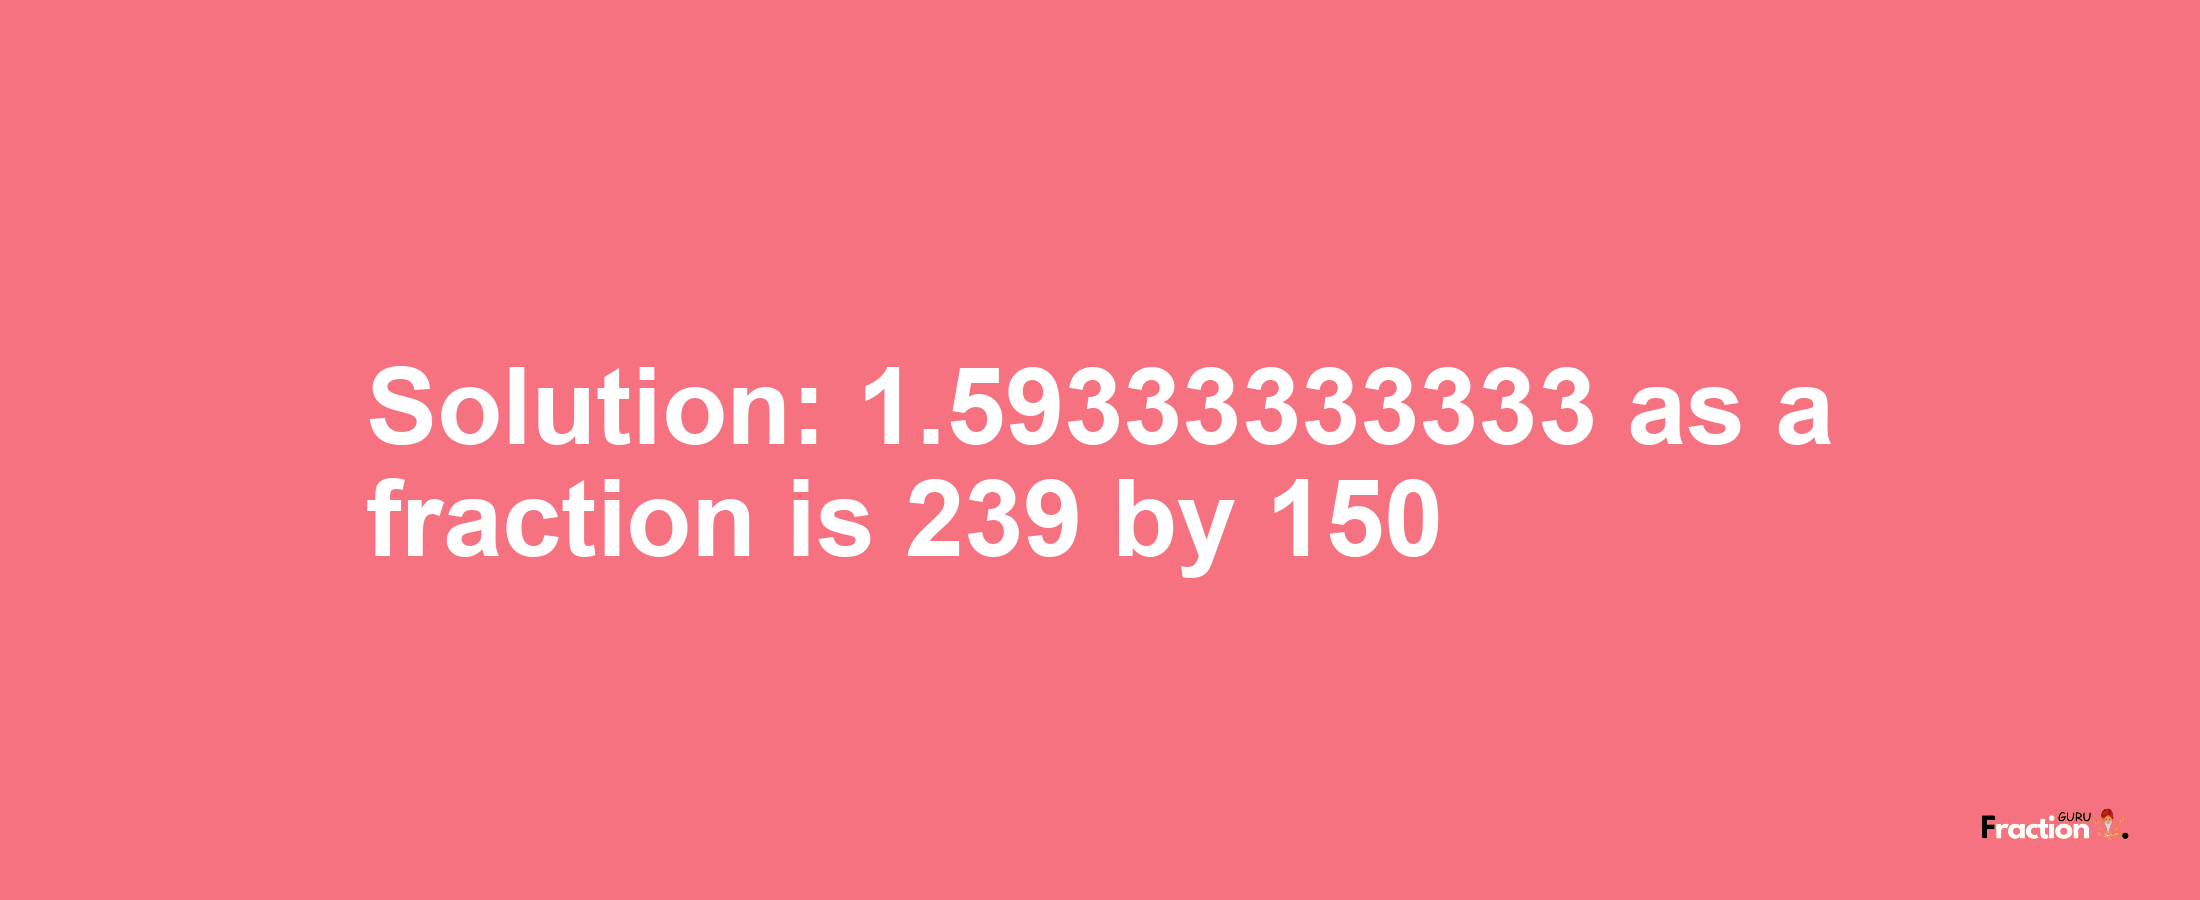 Solution:1.59333333333 as a fraction is 239/150